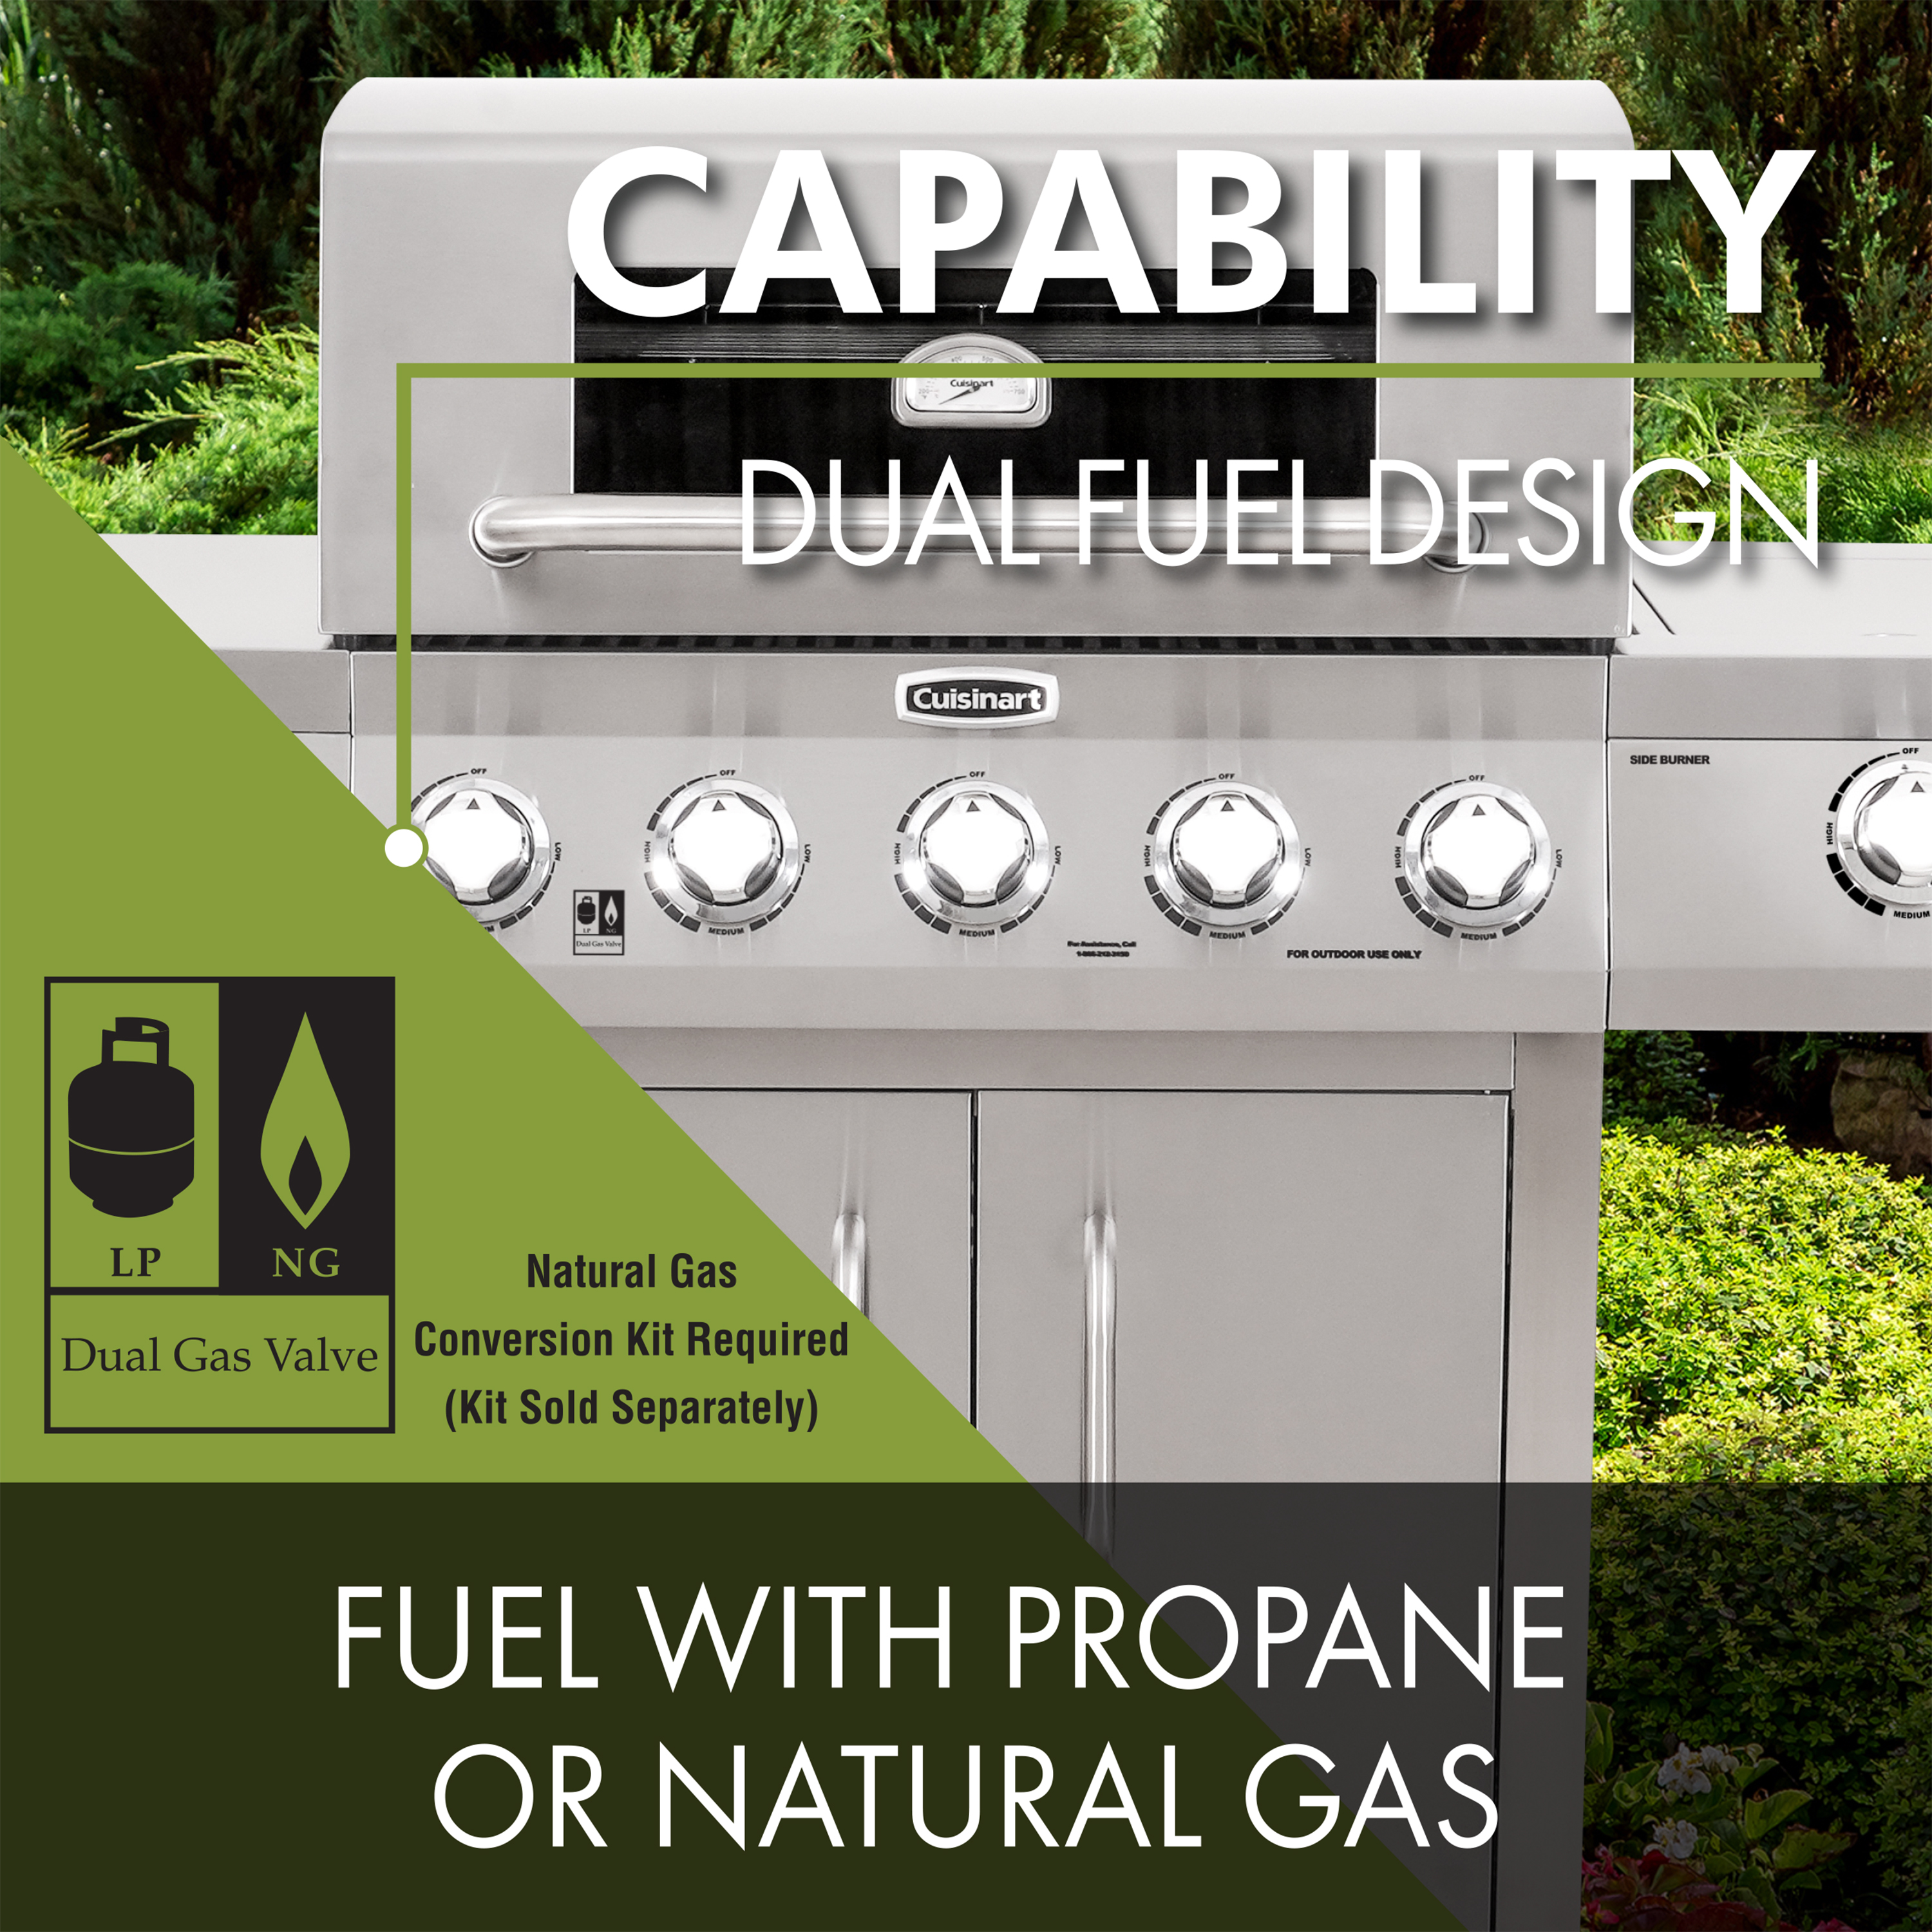 Cuisinart 5-Burner Dual Fuel Gas Grill (Propane/Natural Gas) - image 4 of 21